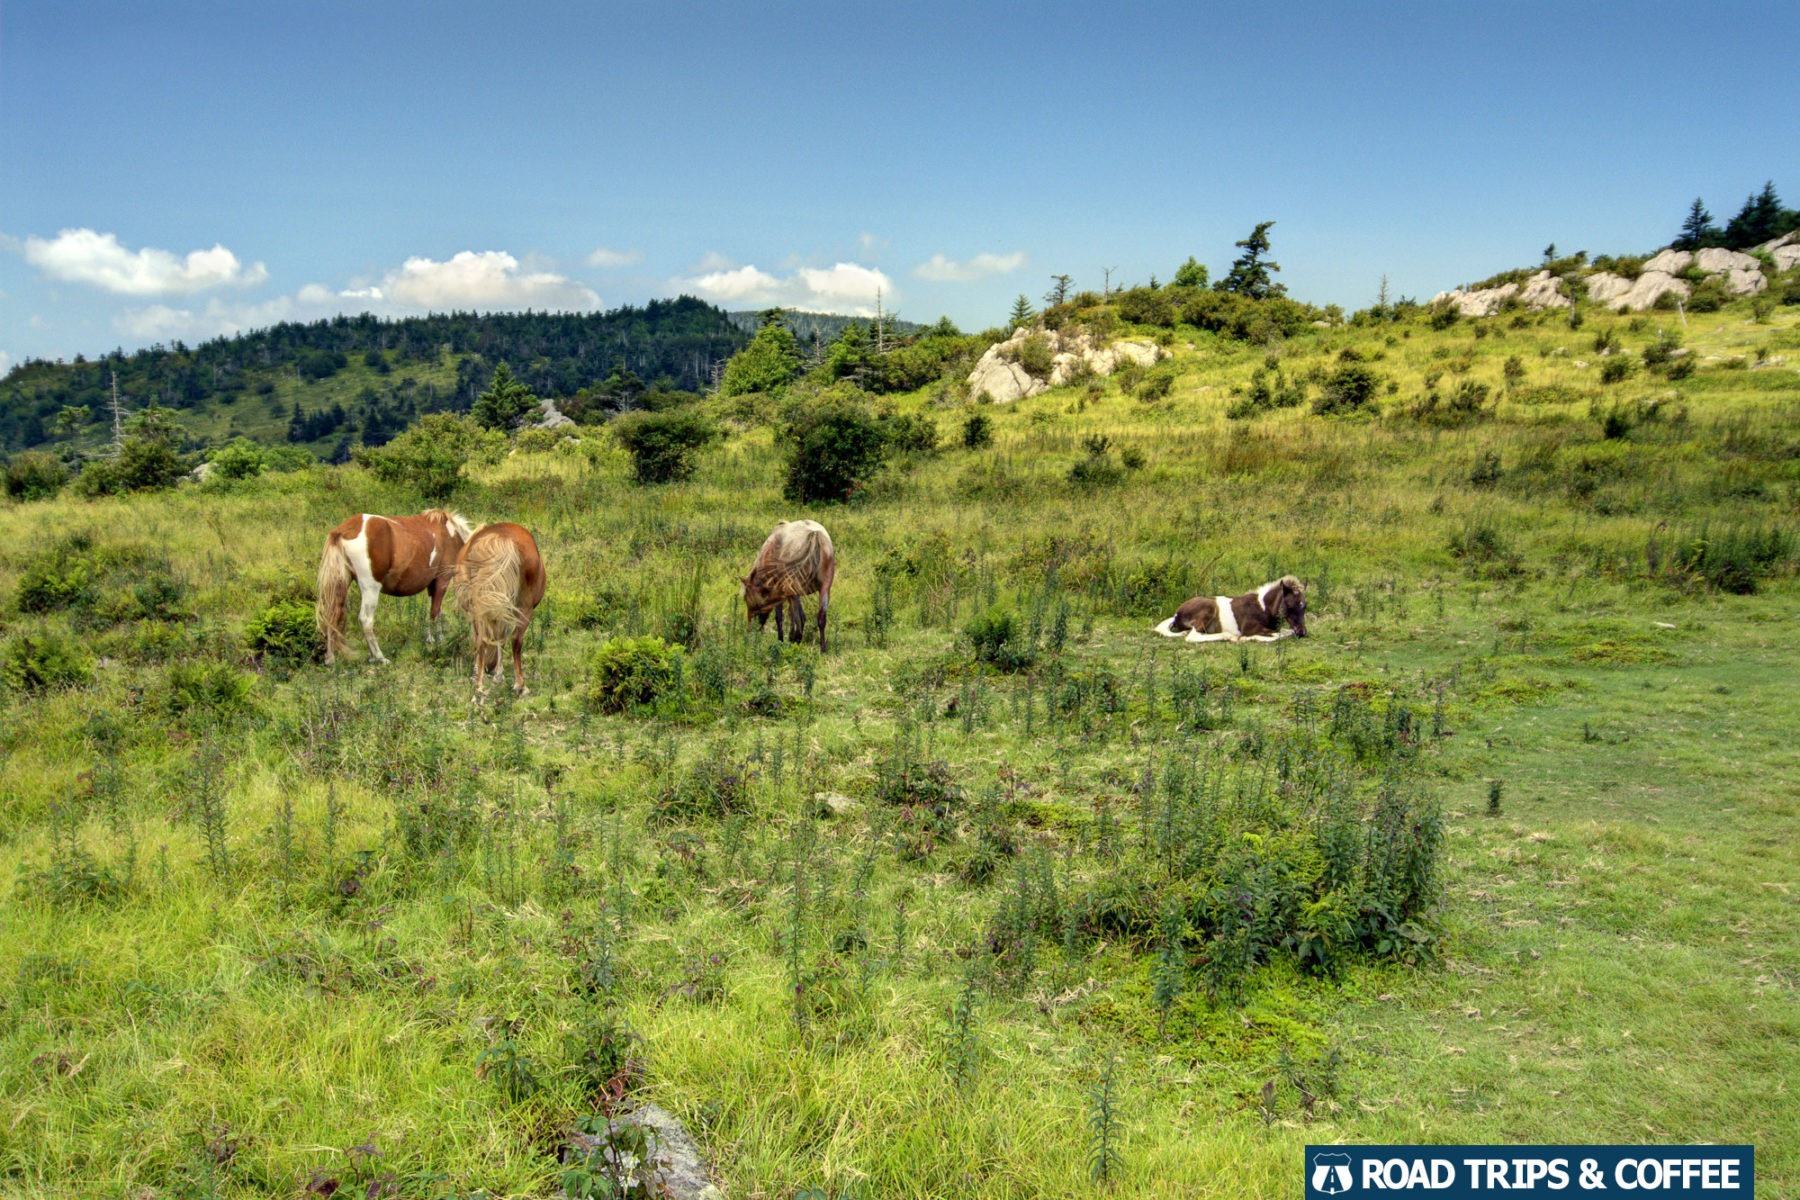 Four wild ponies graze and sleep in a lush green field on the Appalachian Trail near Grayson Highlands State Park in Virginia